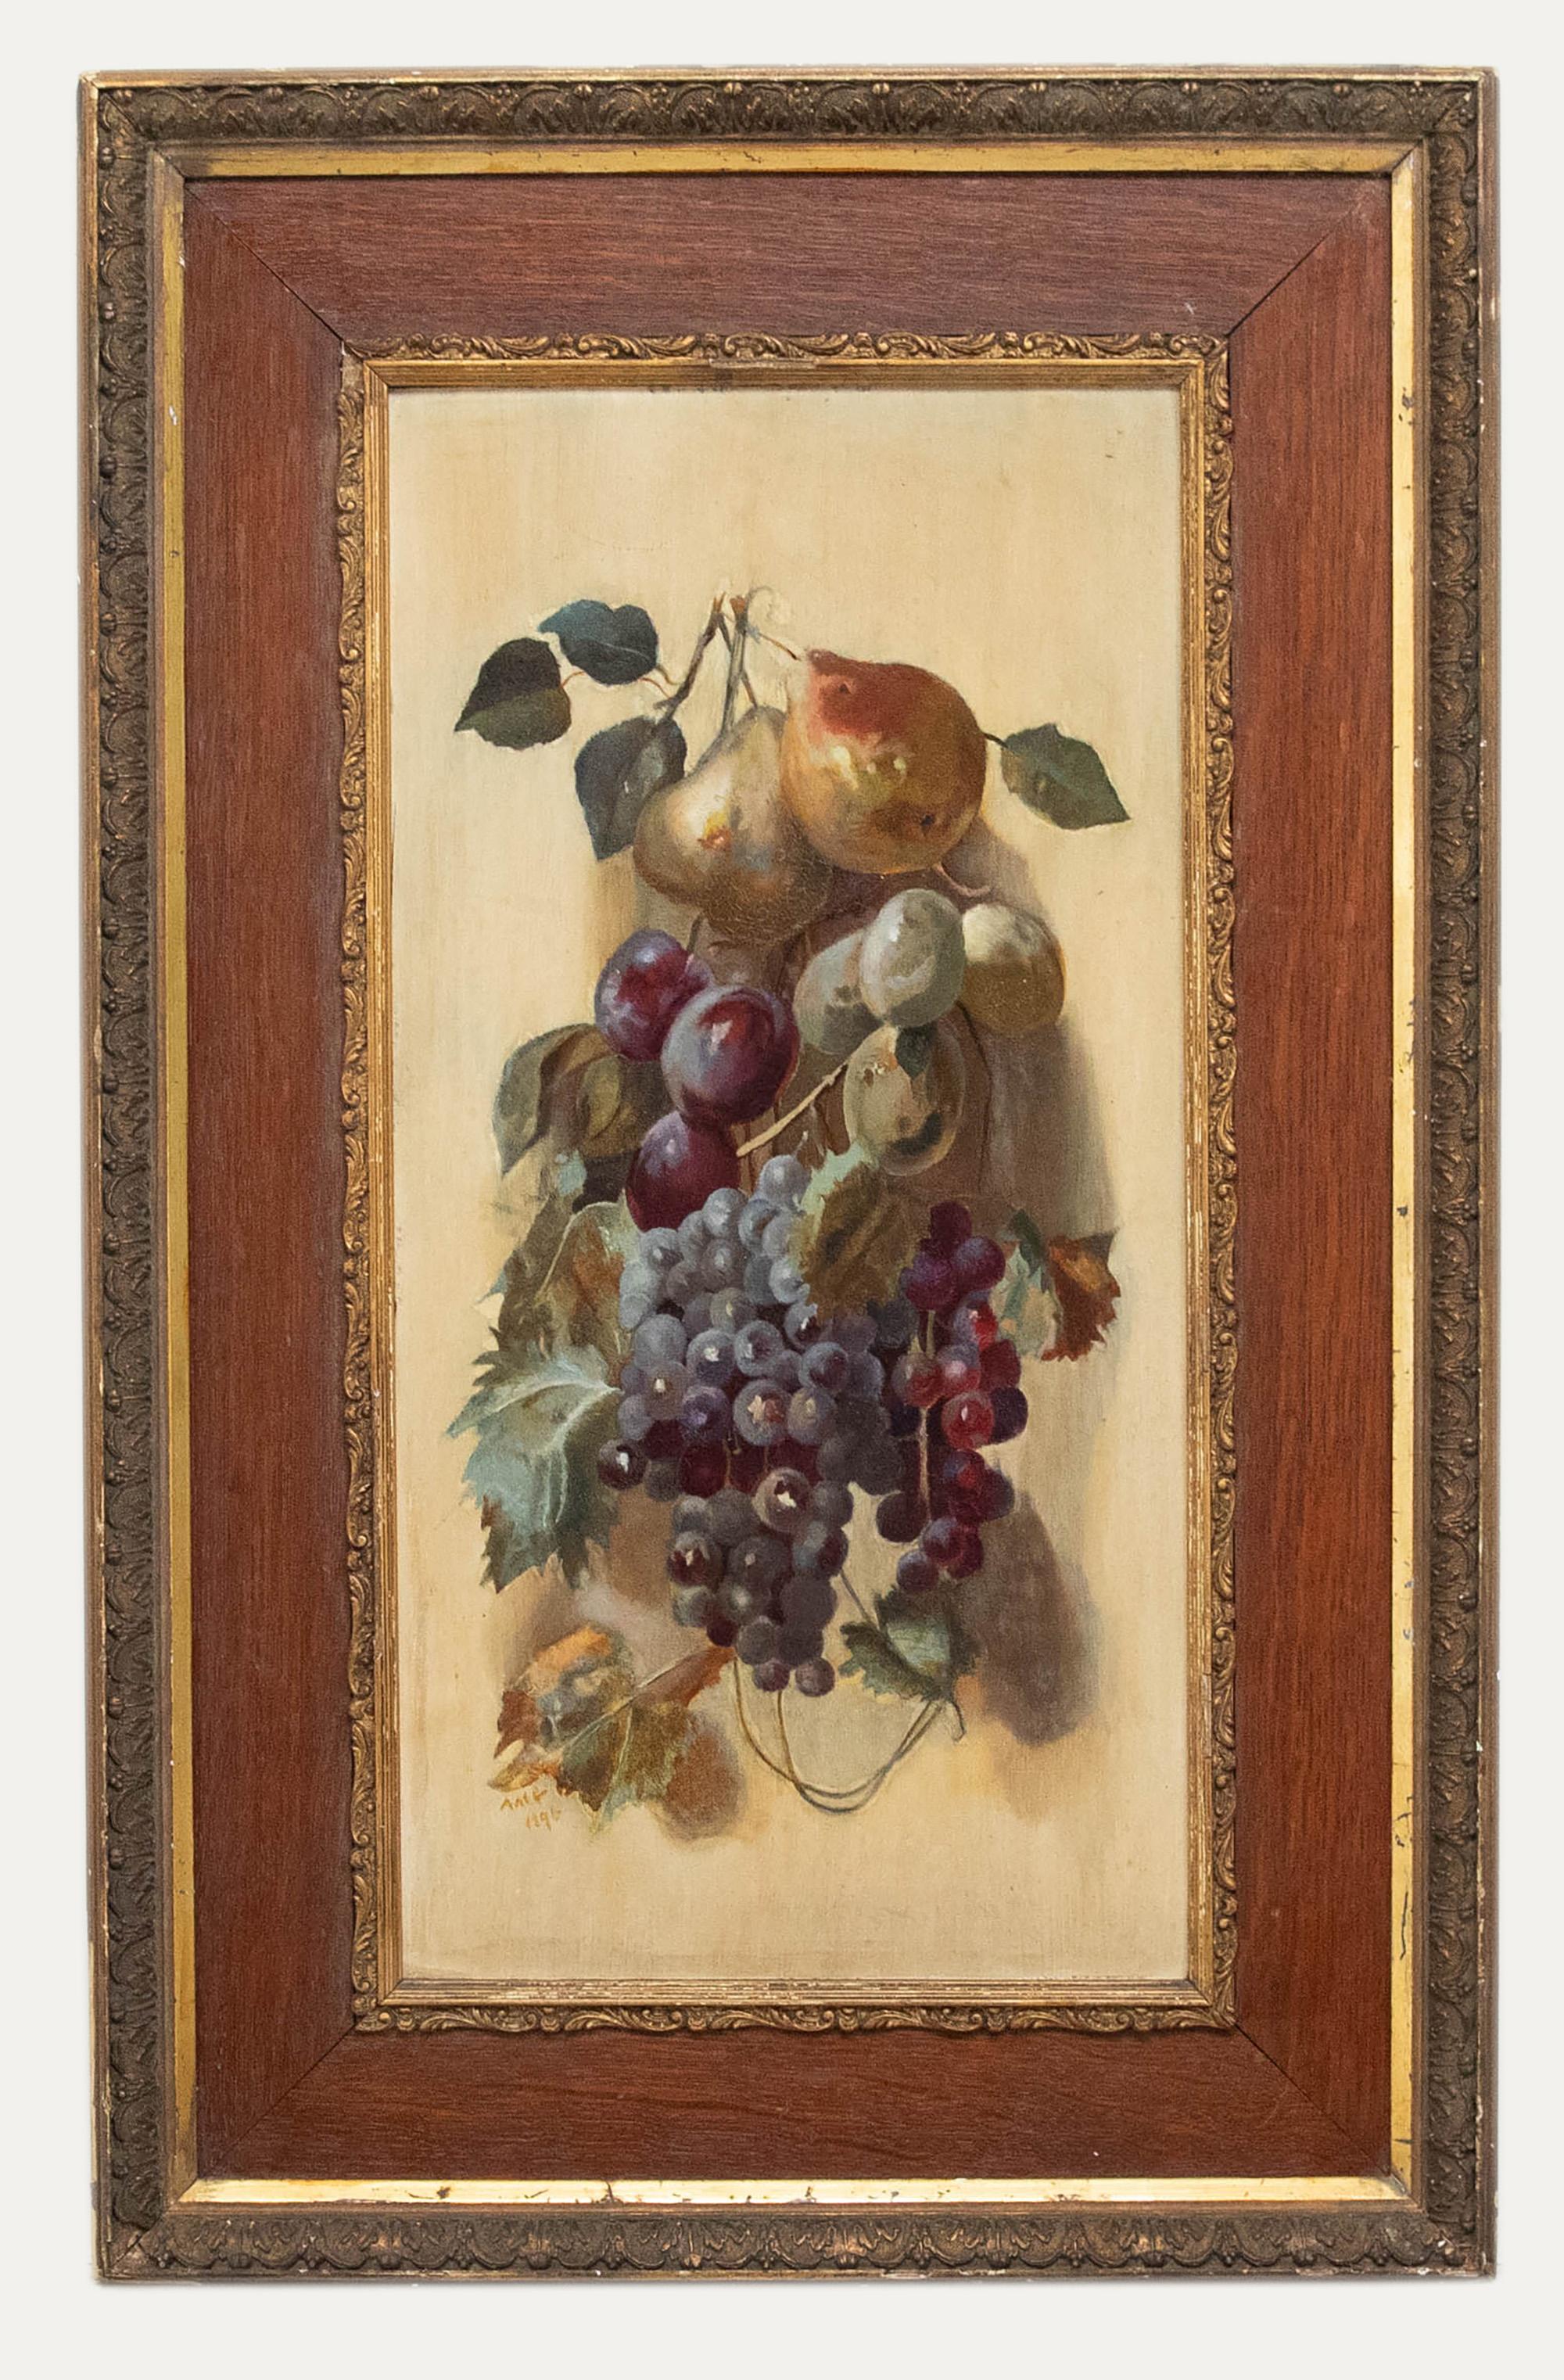 Unknown Still-Life Painting - 1896 Oil - Hanging Fruit